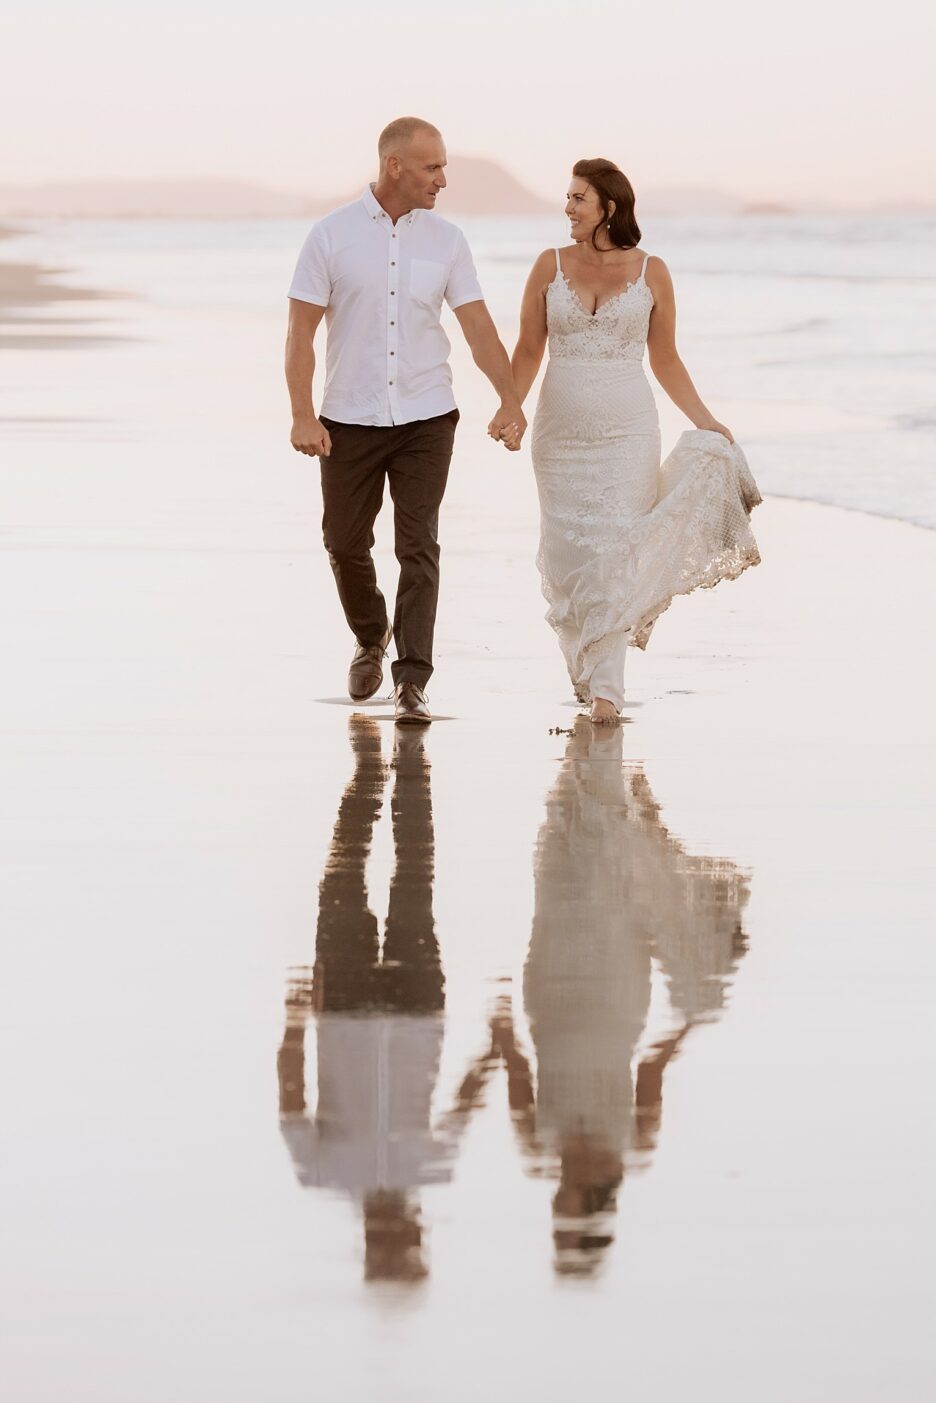 Happy bride and groom casually walking on beach with Mount Maunganui scene